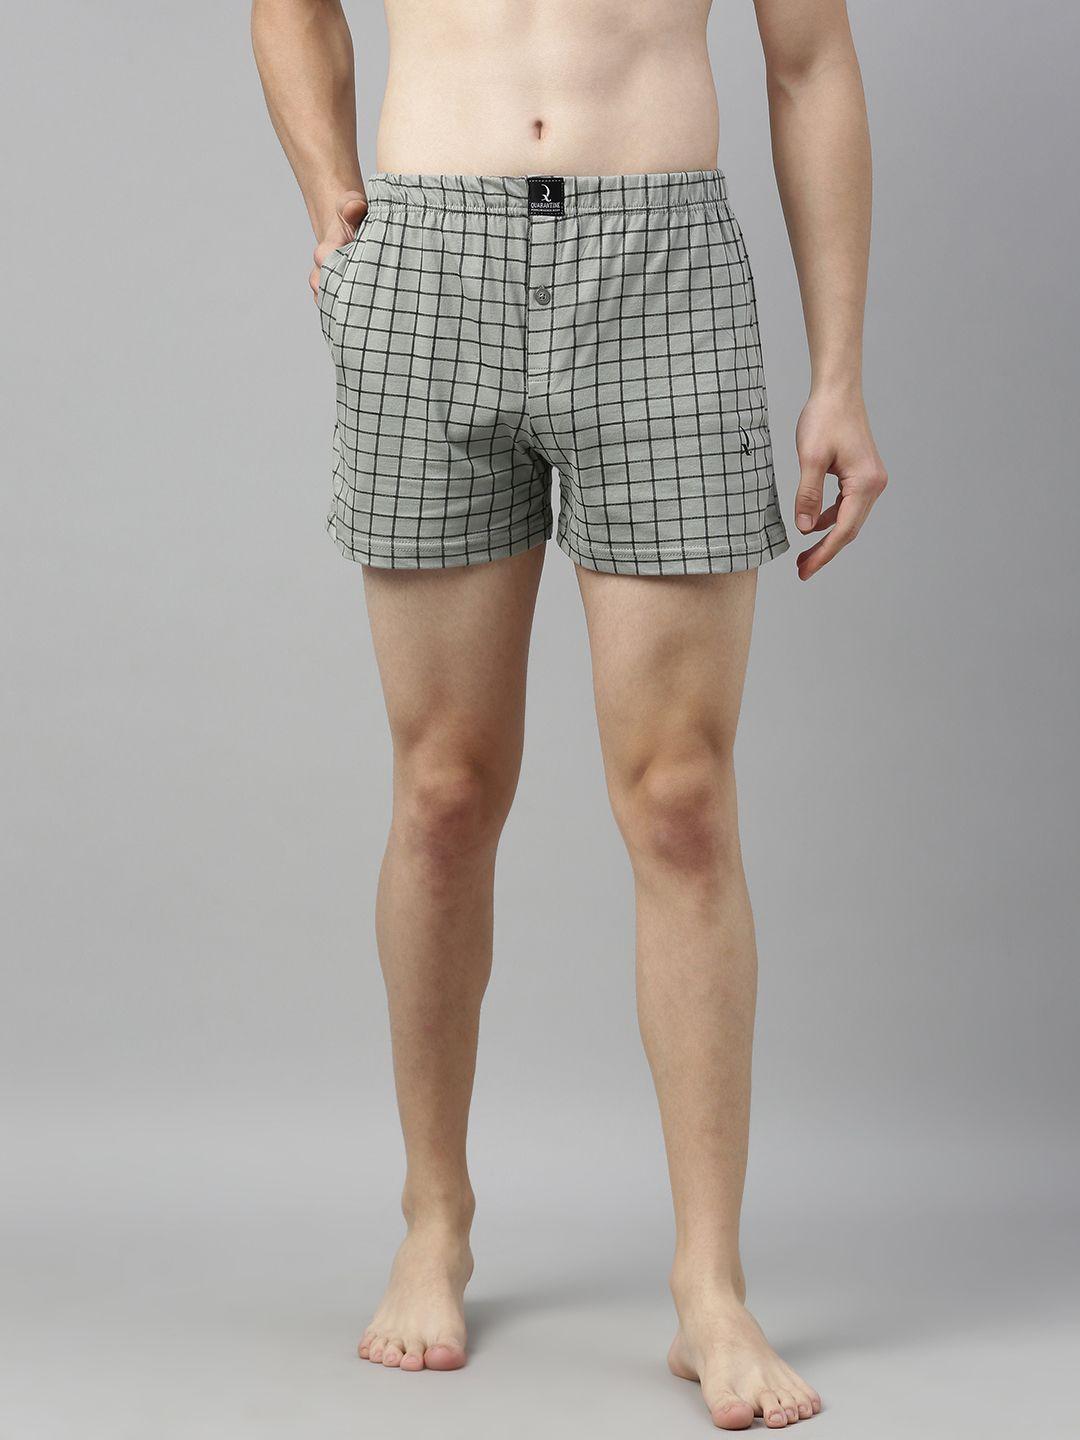 quarantine men grey and black checked pure cotton boxers qbxm001gry-s